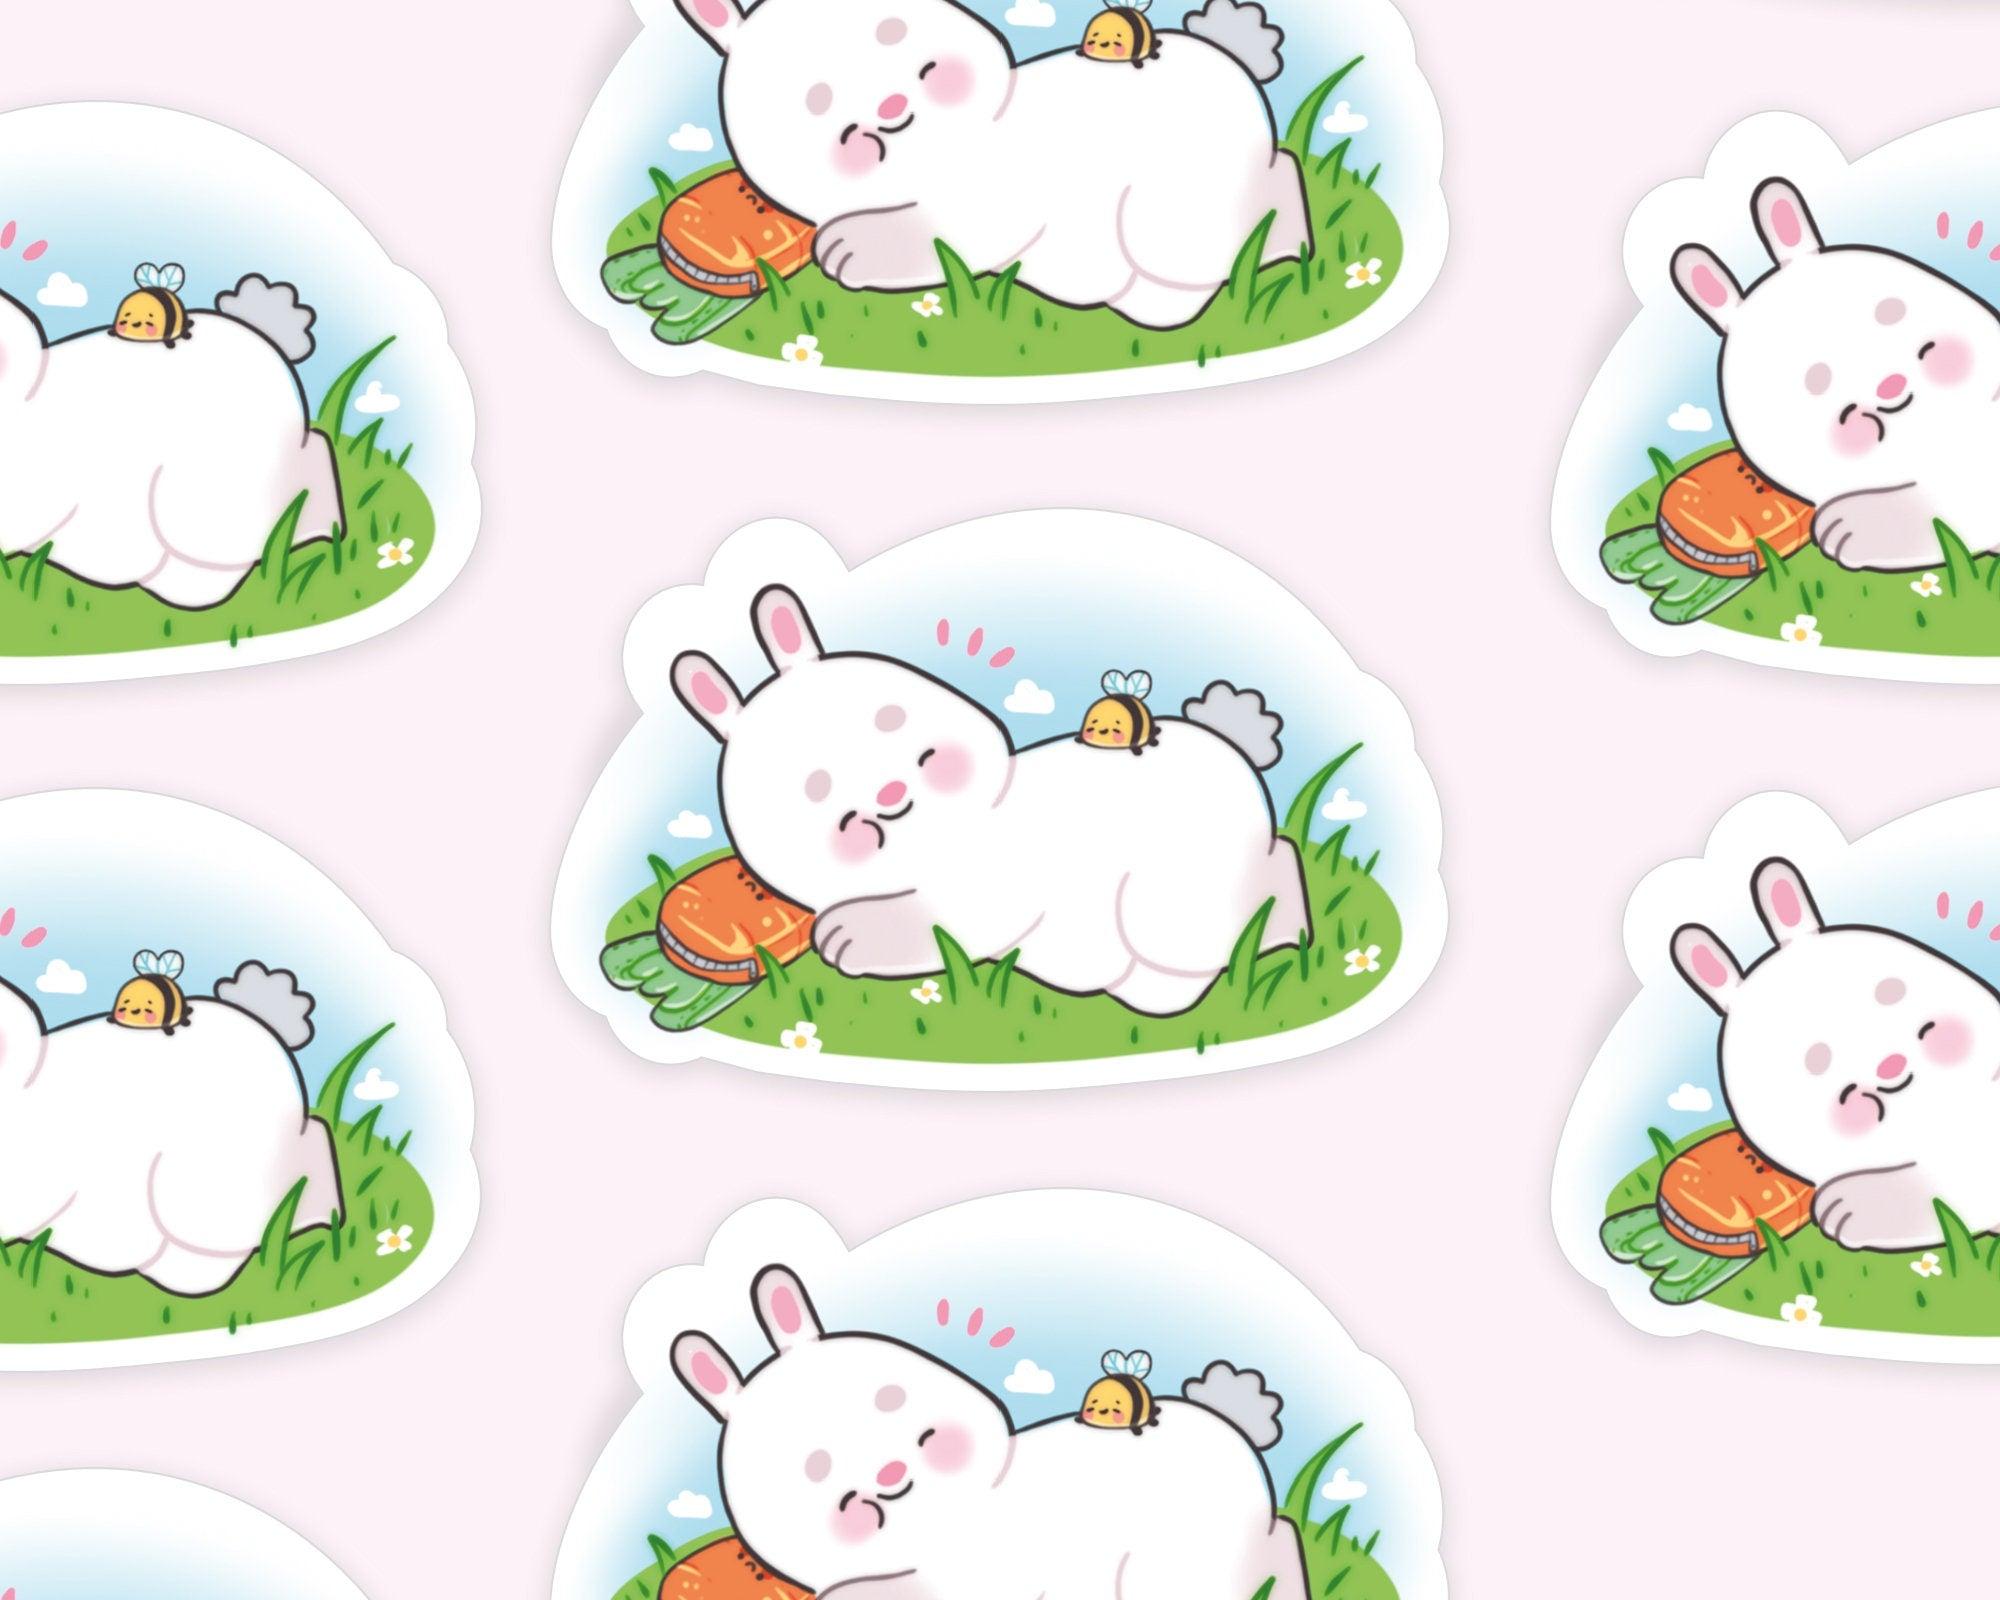 Bonbun & Bumblebutt kawaii bunny and bee die-cut sticker, perfect for spring and Easter decorations.